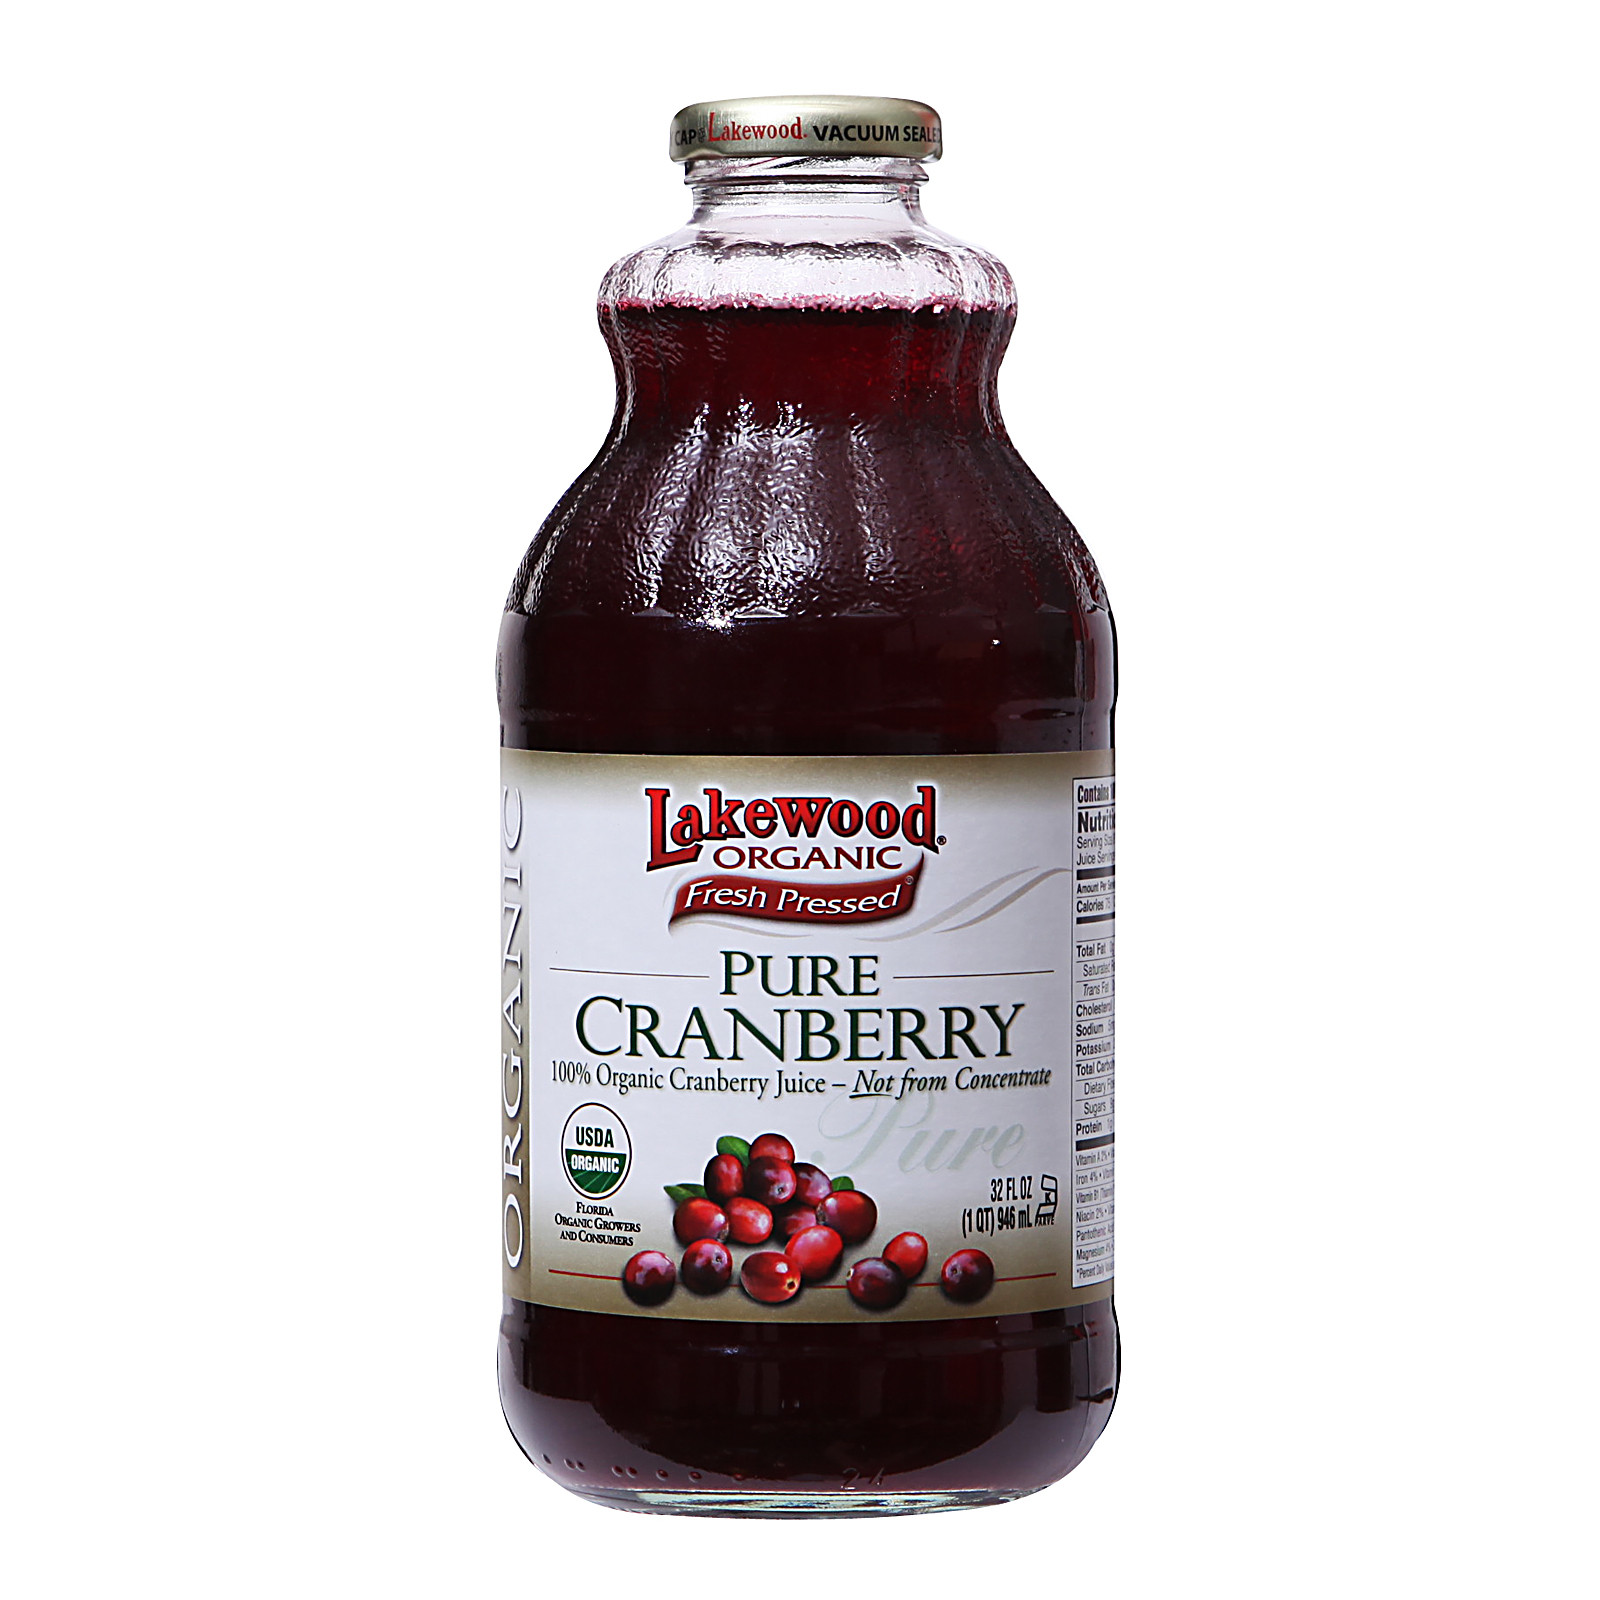 Organic Cranberry Juice
 Lakewood Organic Pure Cranberry 0 from RedMart